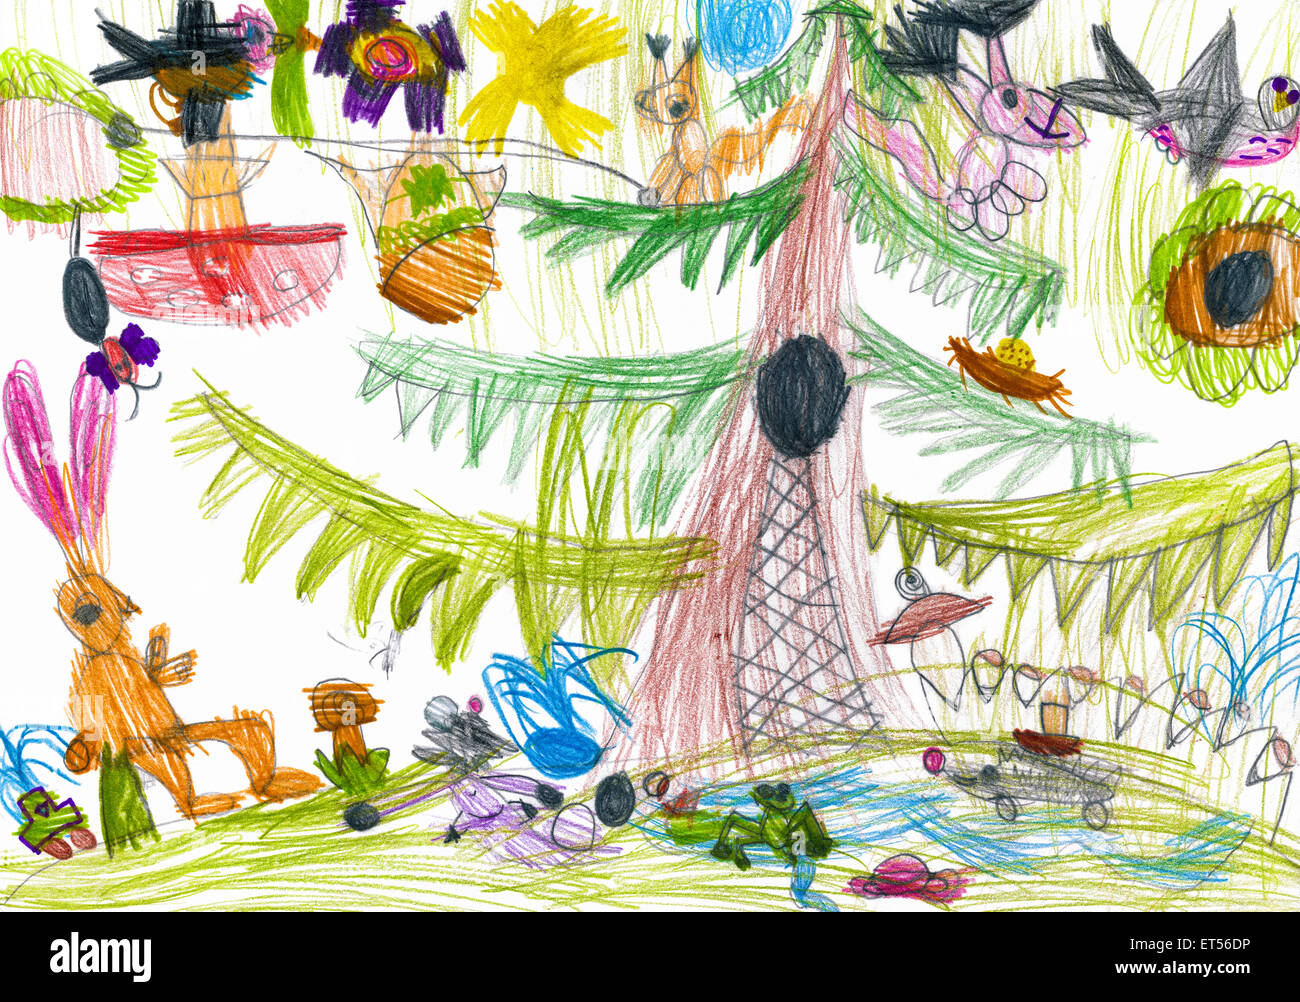 Forest Wild Animals Child Drawing High Resolution Stock Photography and